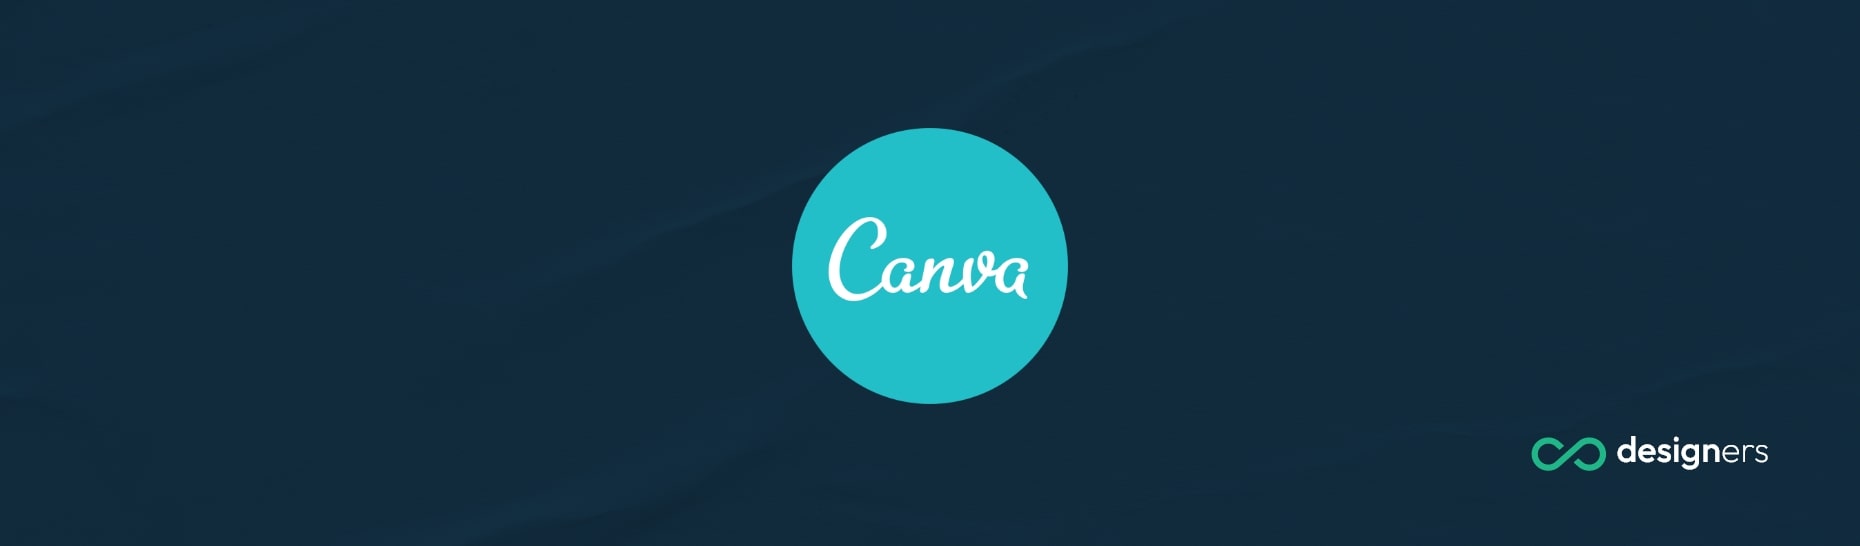 How Do I Print From Canva Without Paying?